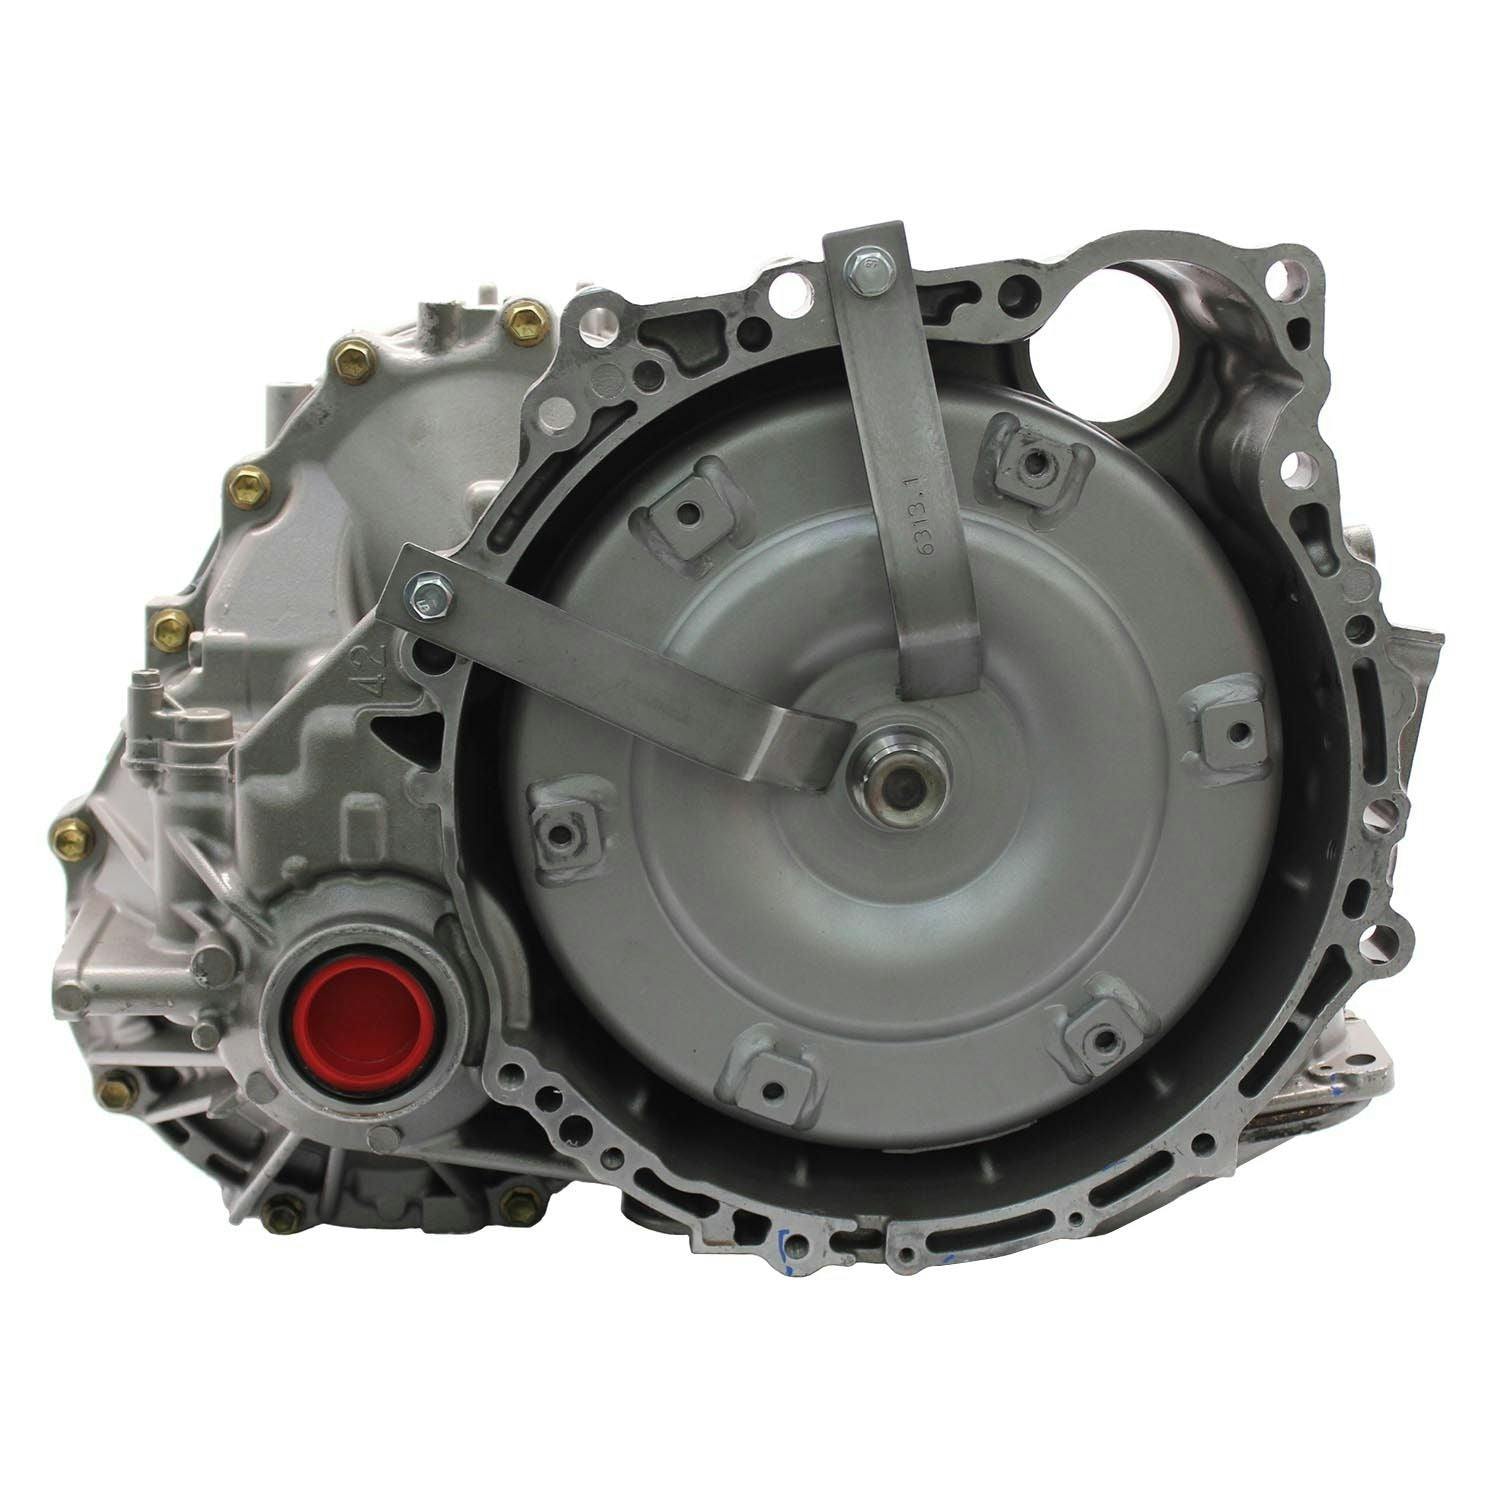 Automatic Transmission for 2004-2007 Toyota Highlander/Lexus RX330 FWD with 3.3L V6 Engine